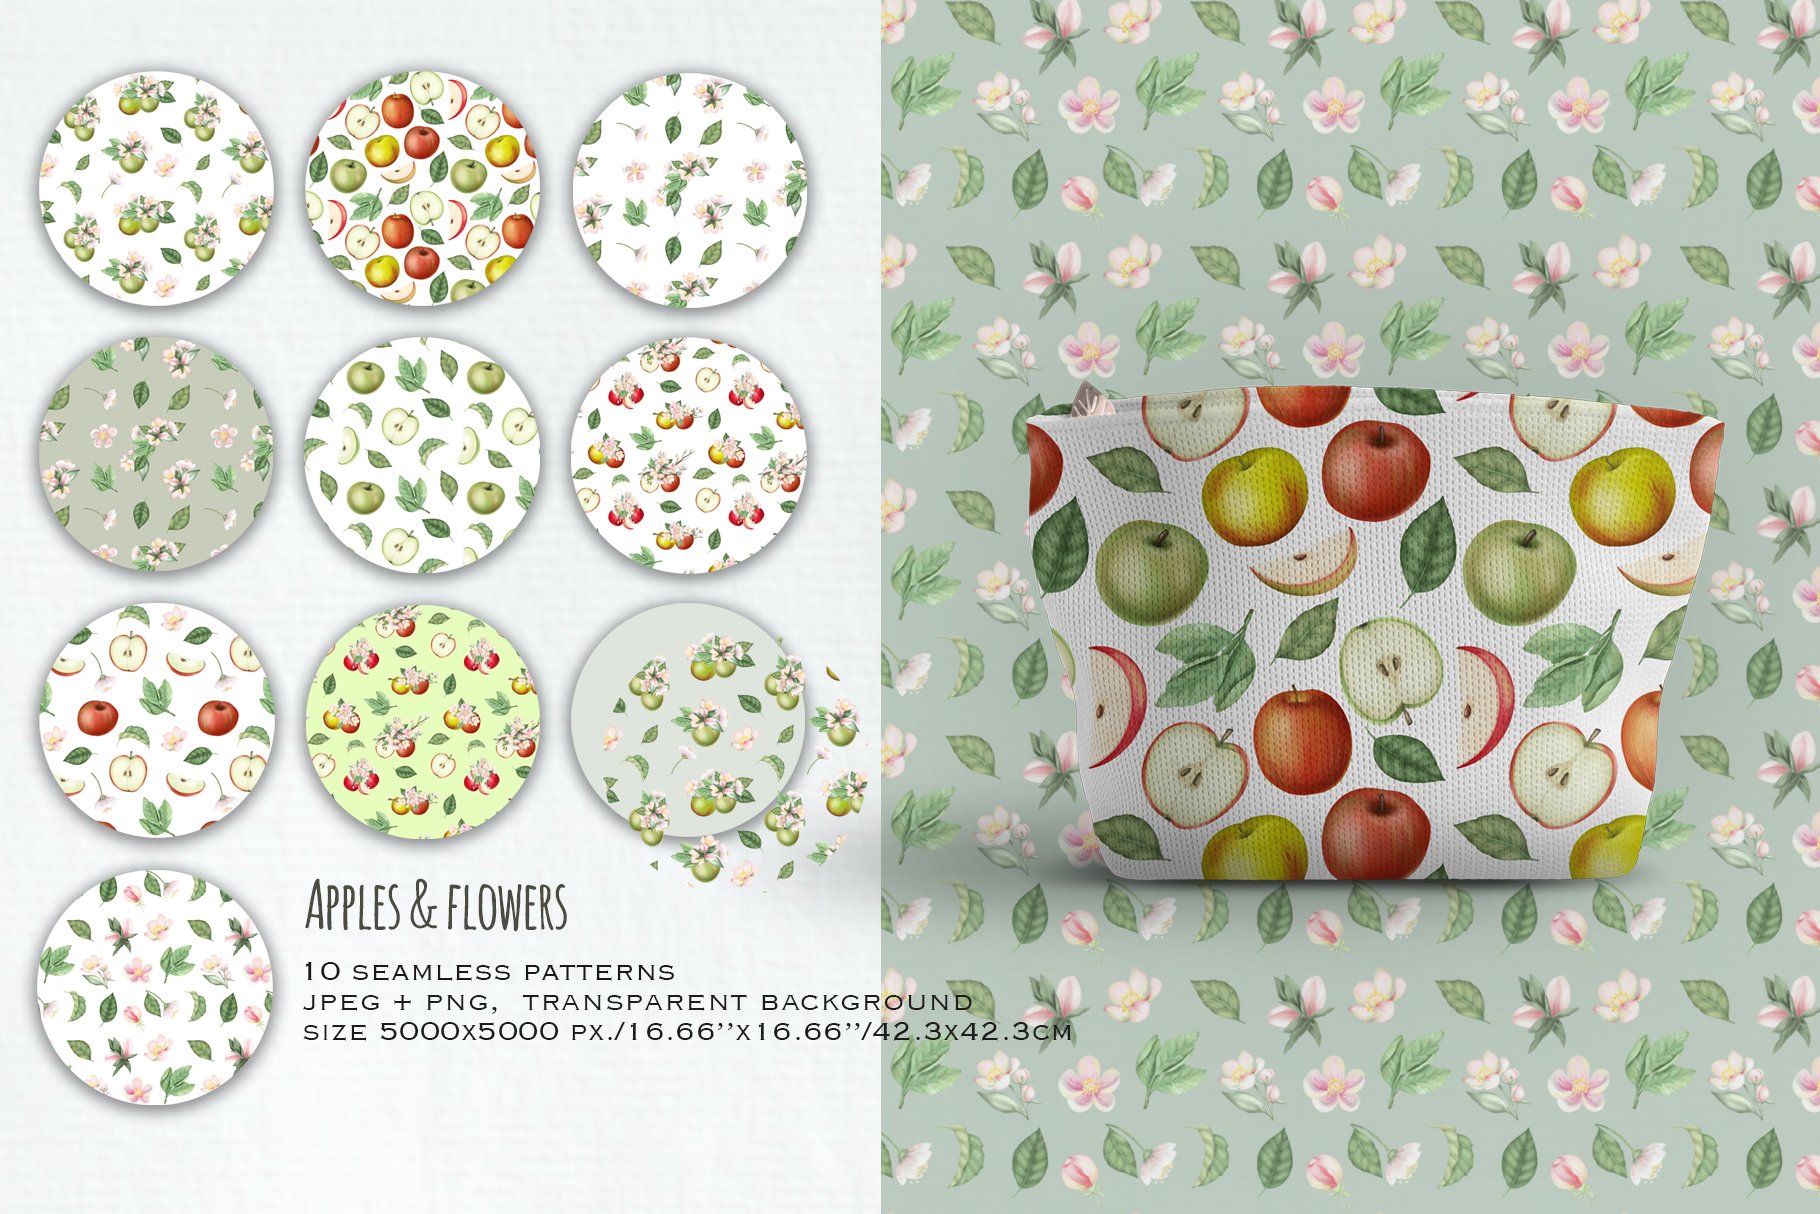 Some options of flowers and apple patterns.